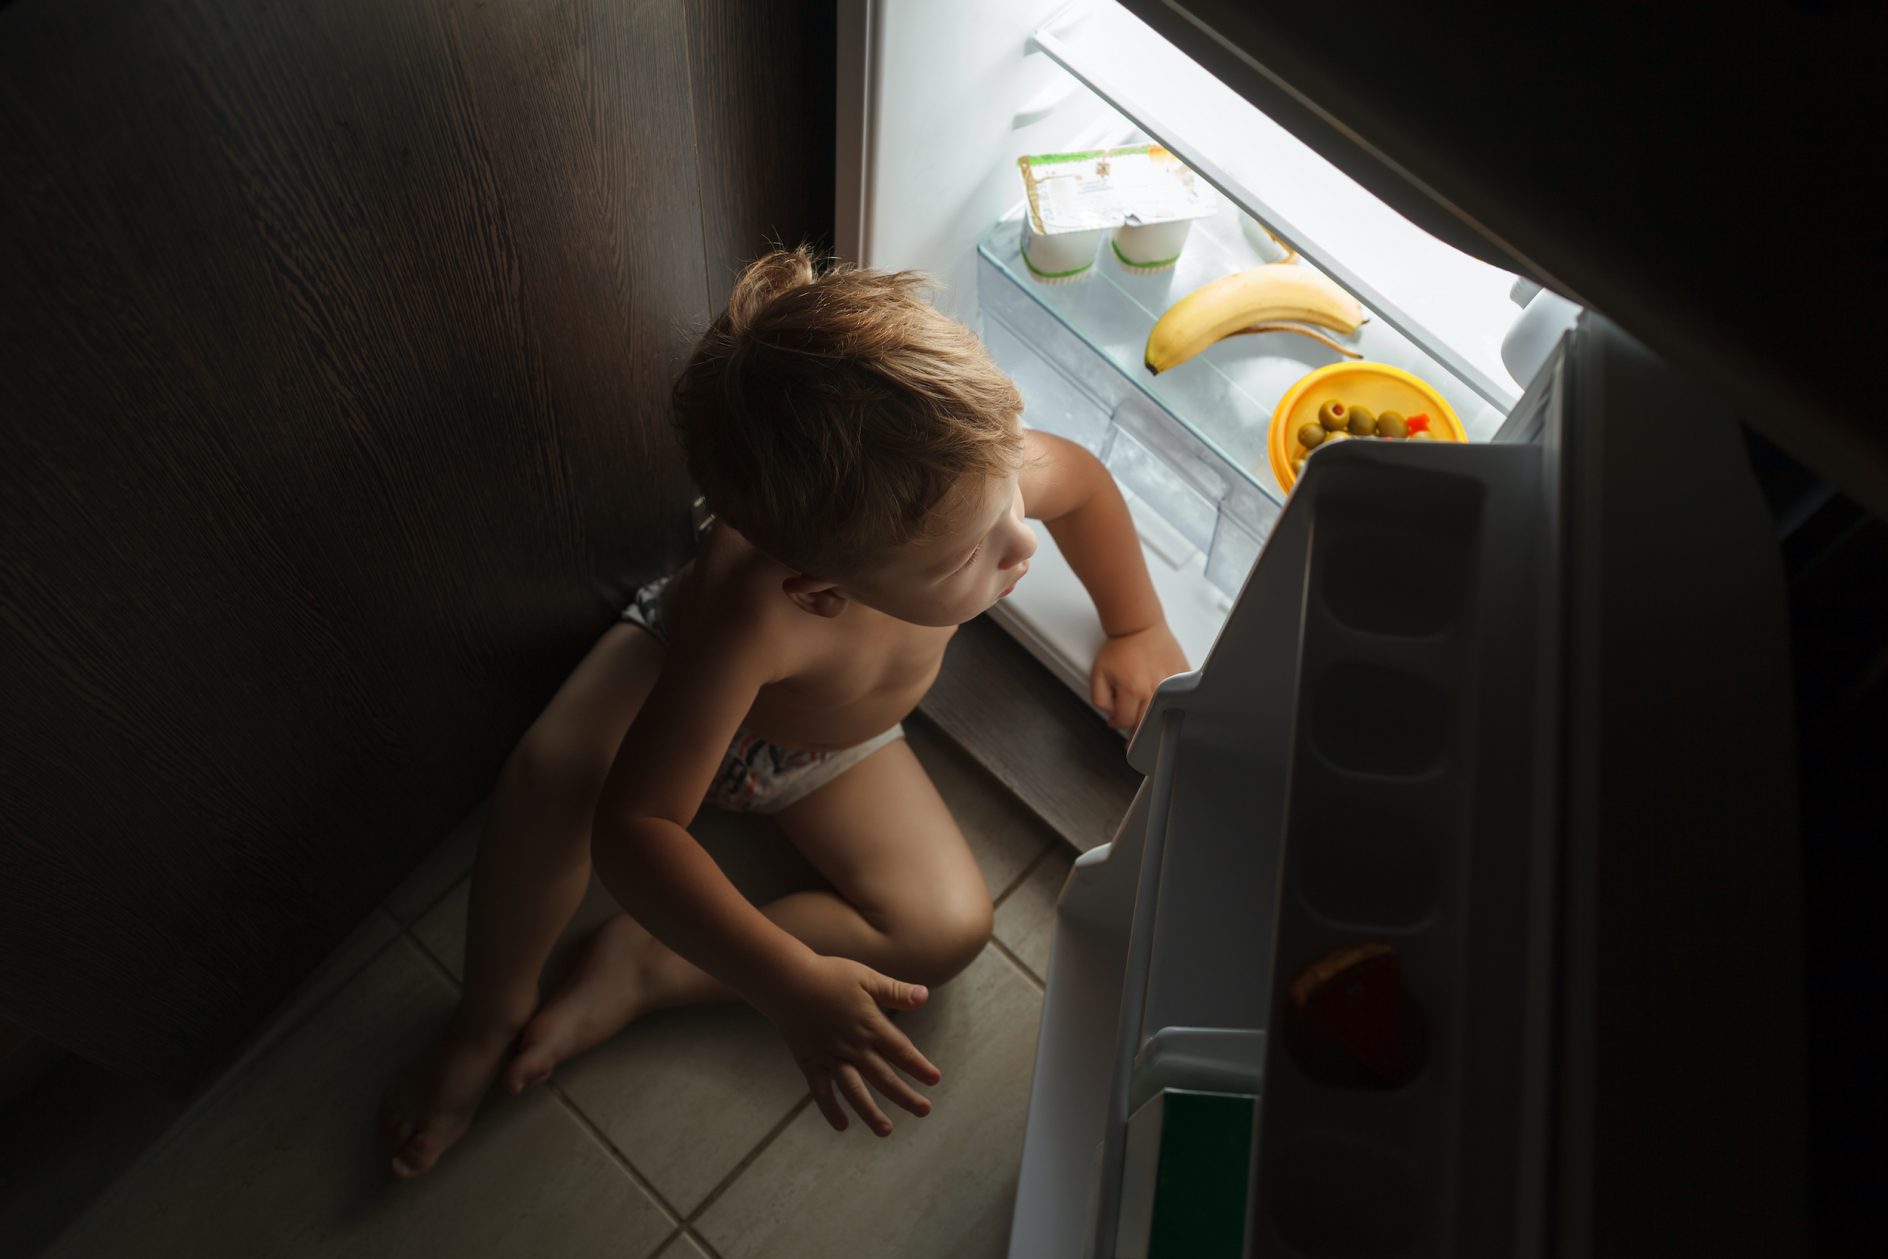 Childhood Obesity May Be Caused by Changes in Reward Center of Brain